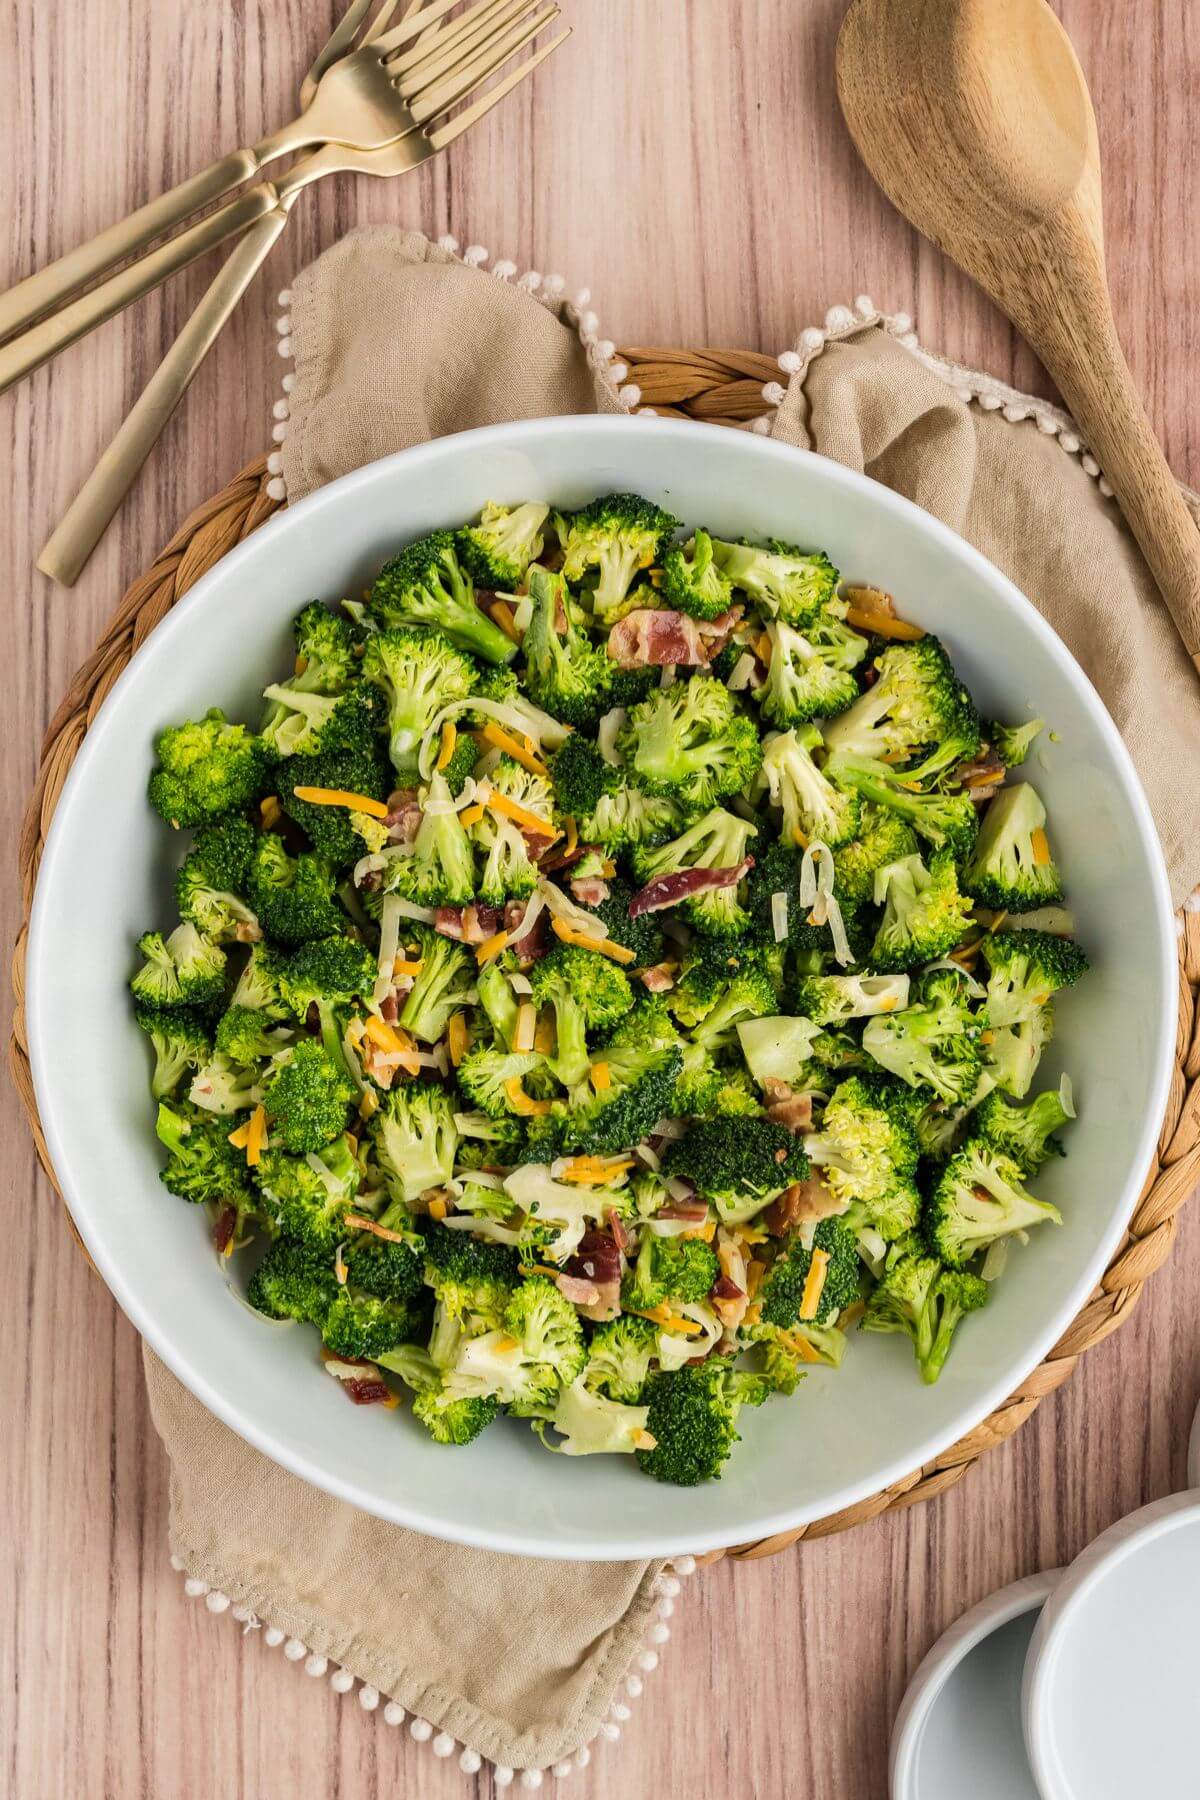 A large shallow serving bowl is filled with bright green broccoli florets, shredded cheese, and bacon chunks with utensils and a fine cloth.